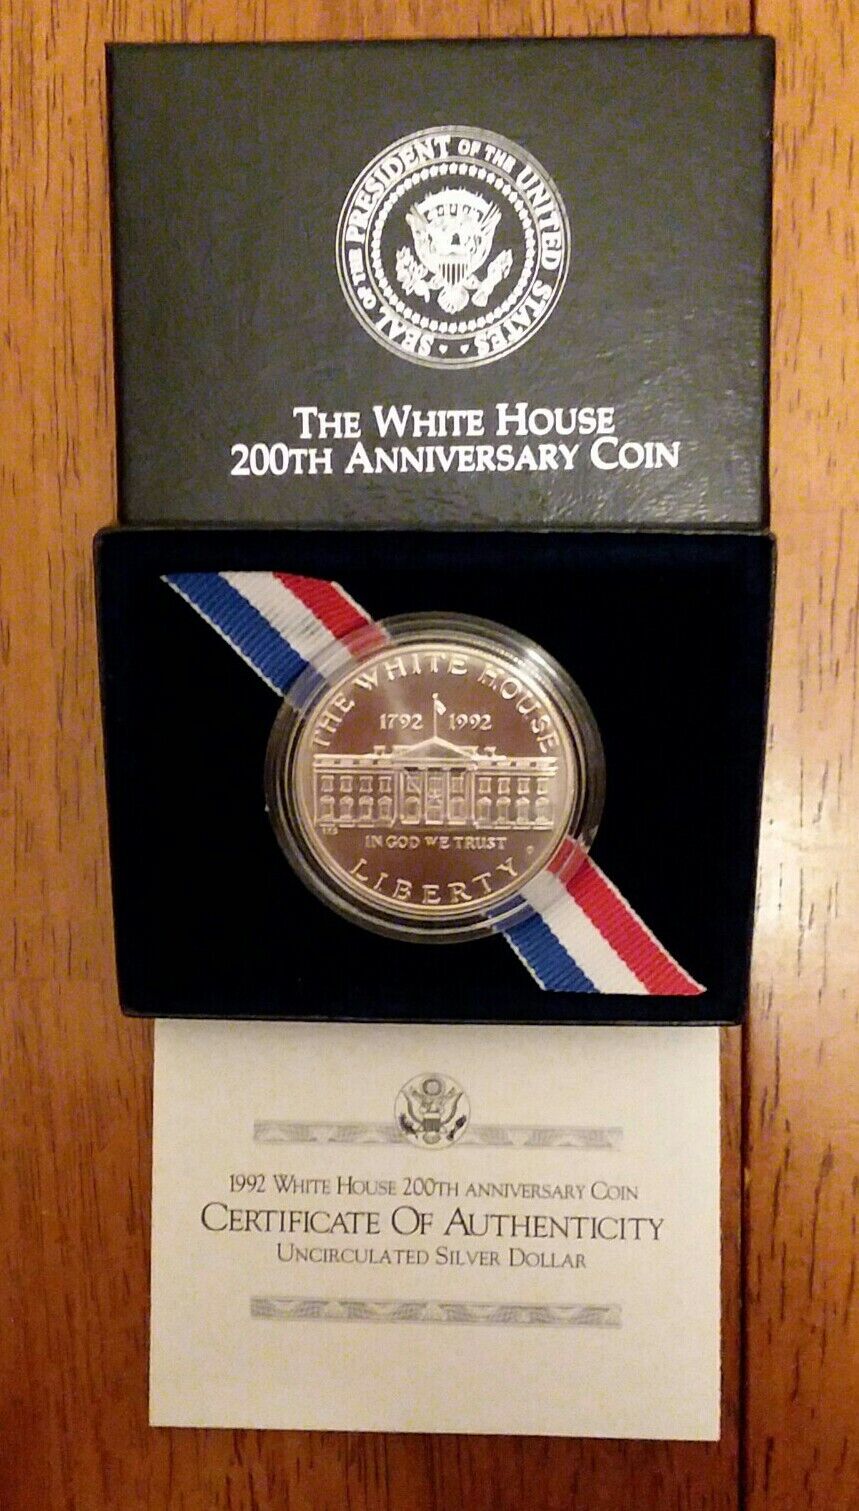 1992 The White House 200th Anniversary Coin Proof Silver Dollar with Box and COA